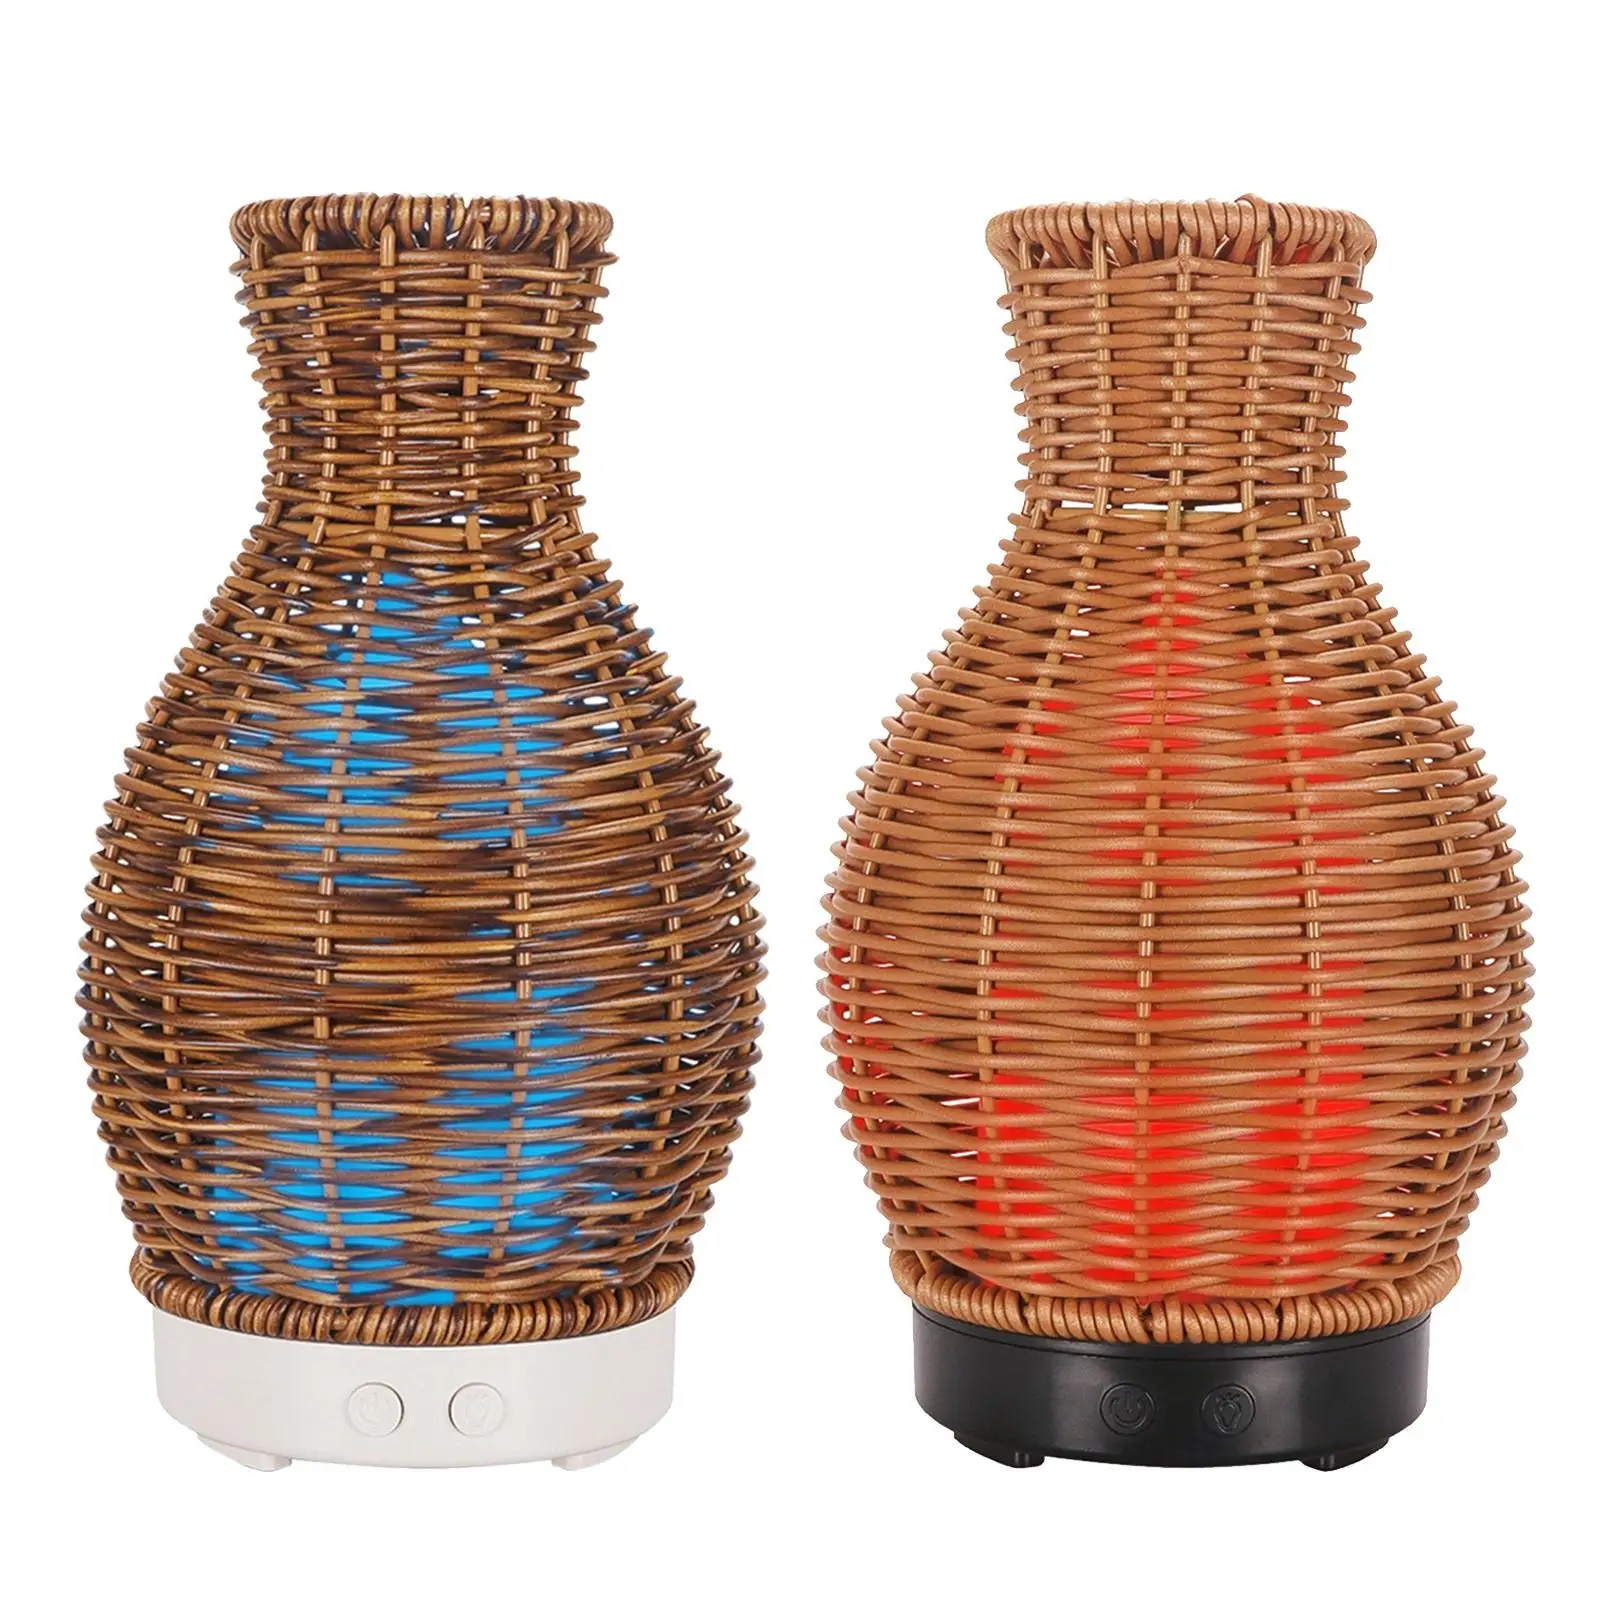 100ml Tabletop Rattan Cool Humidifier Aroma Air Purifier with Nightlight for Bedroom Car Living Room Bathroom